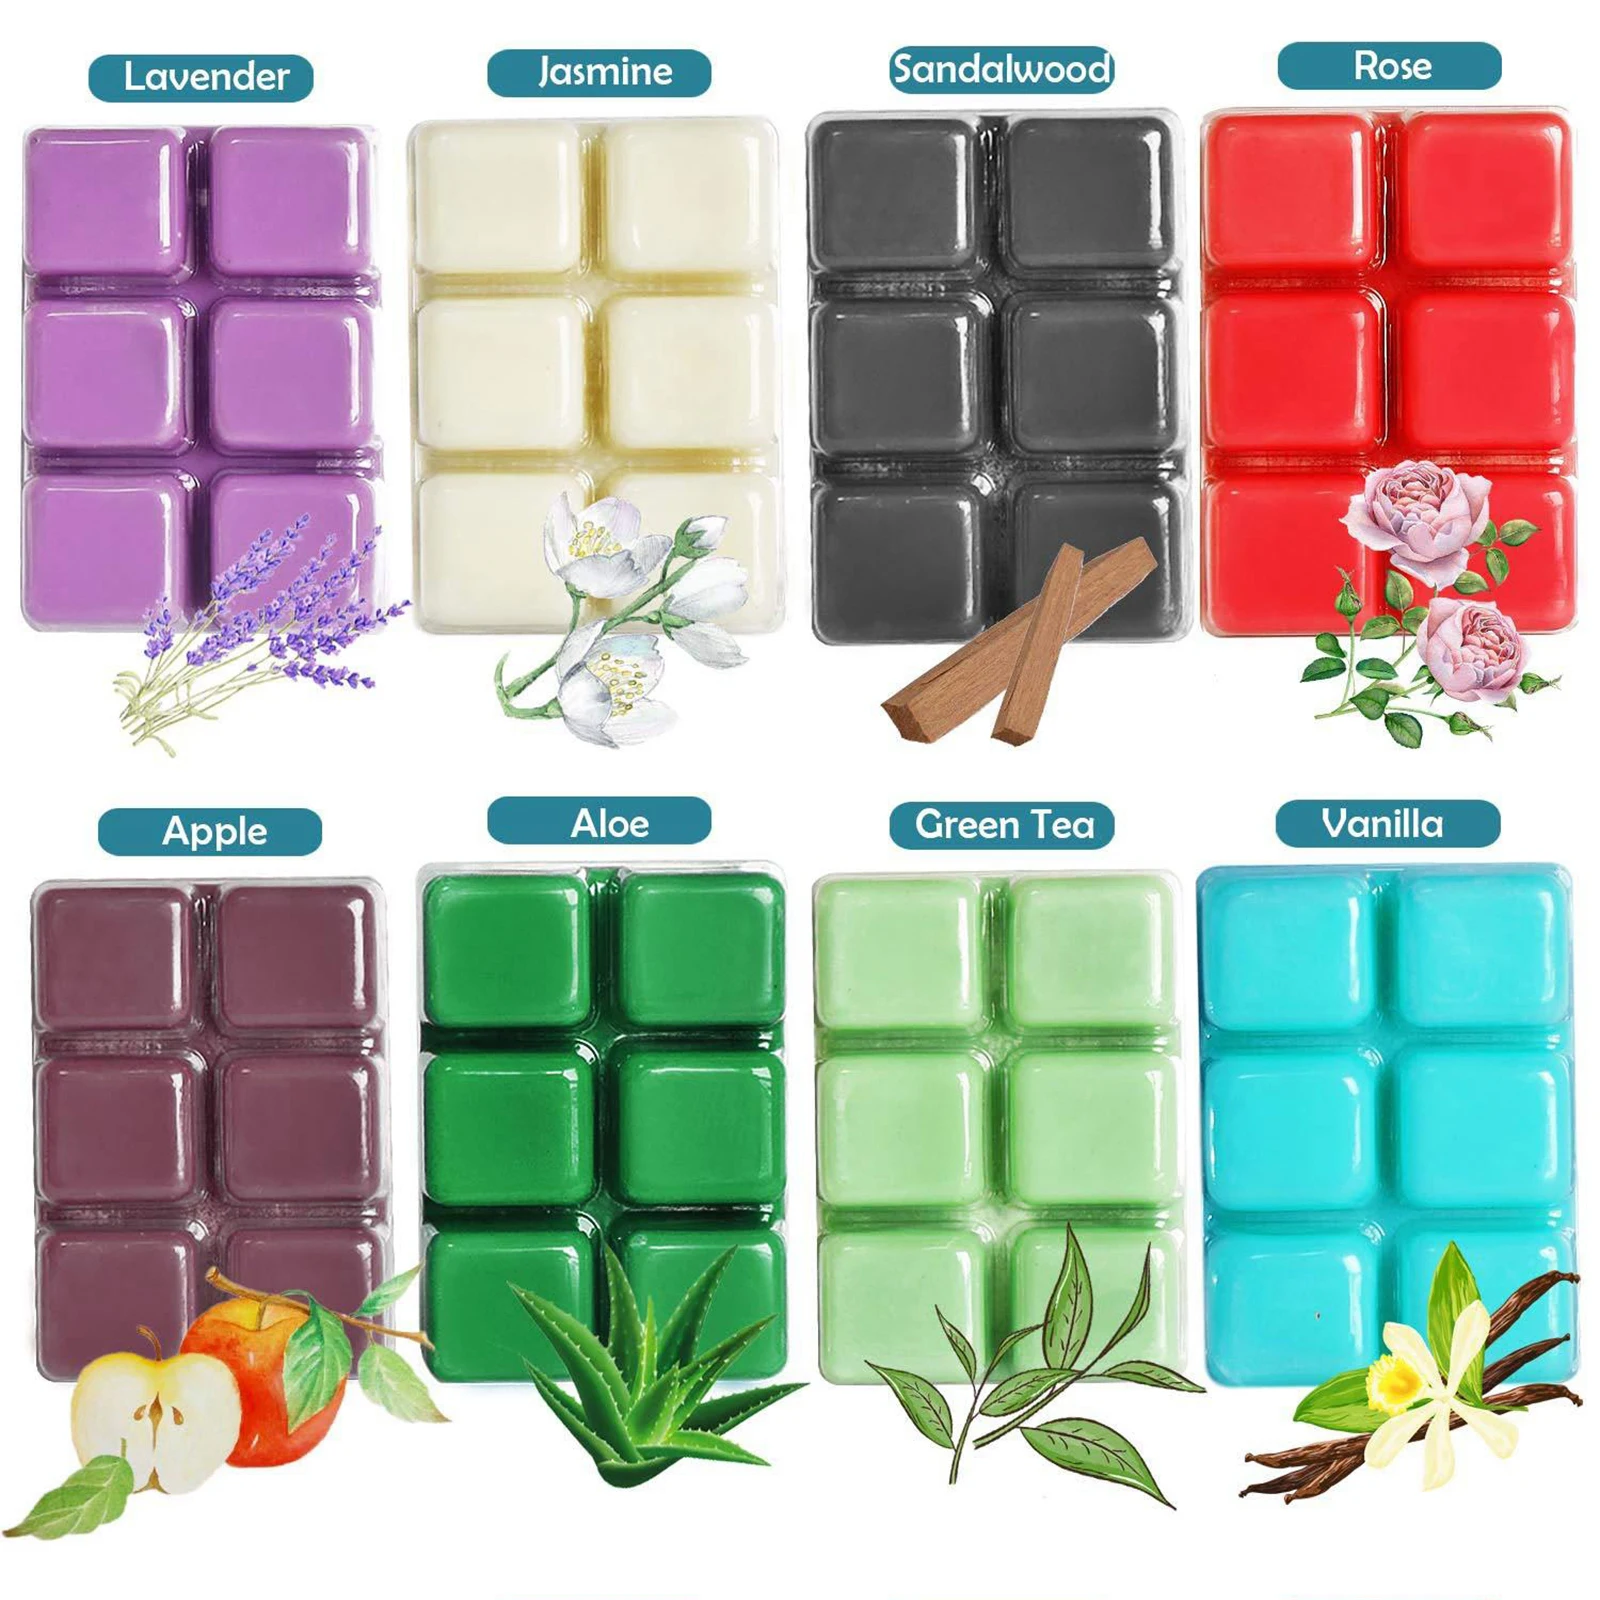 Yuzu Kimono Flower Wax Melts Wax Cubes Scented Soy Tarts For Candle Warmers Assorted Scents Japanese Garden Multi-Pack 3 Packs Variety Cherry Blossoms 